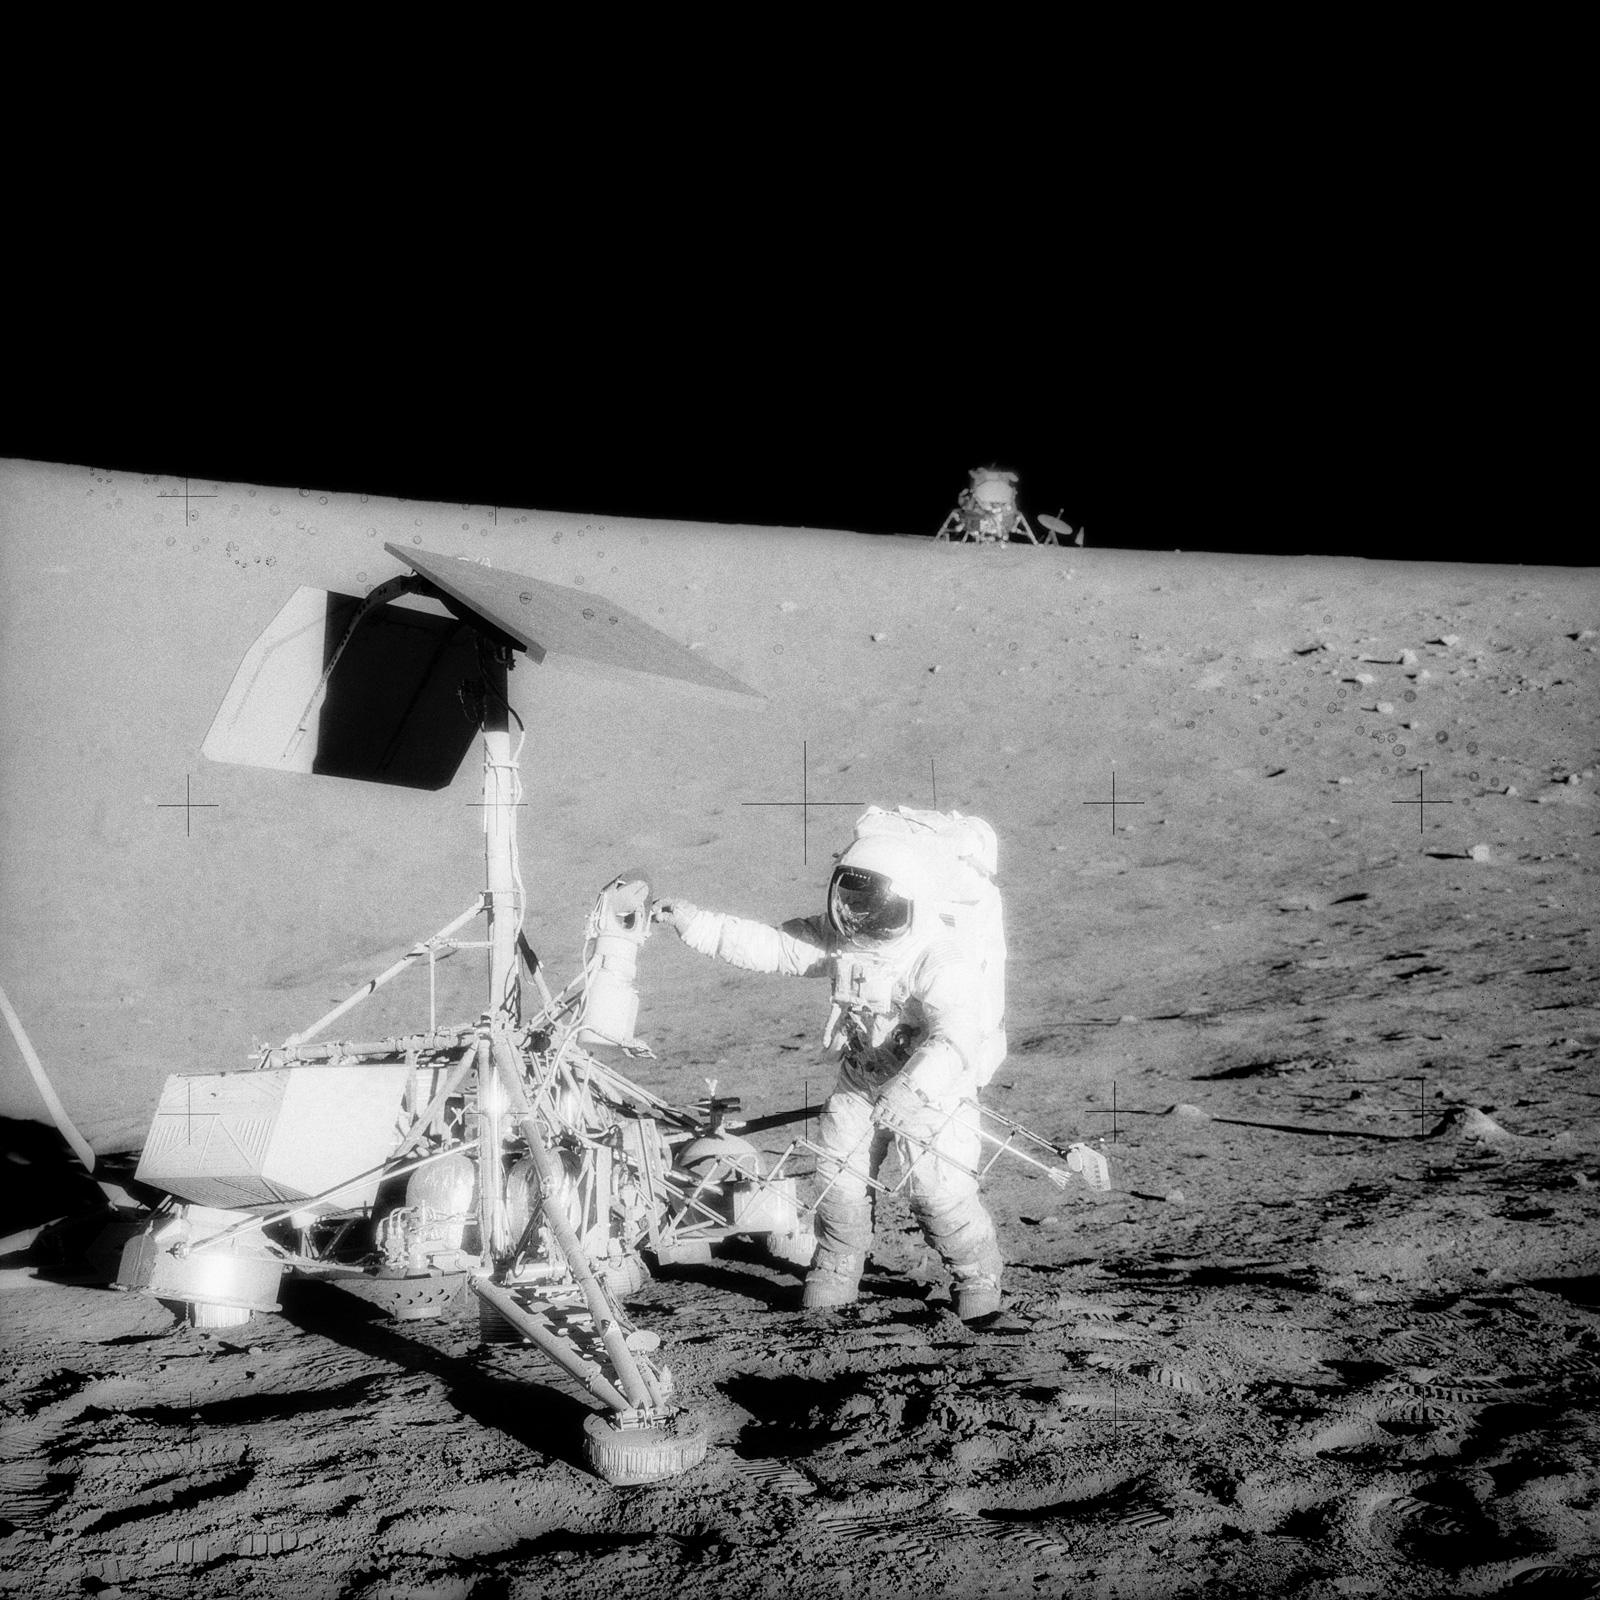 Astronaut standing next to robotic spacecraft on the surface of the Moon.